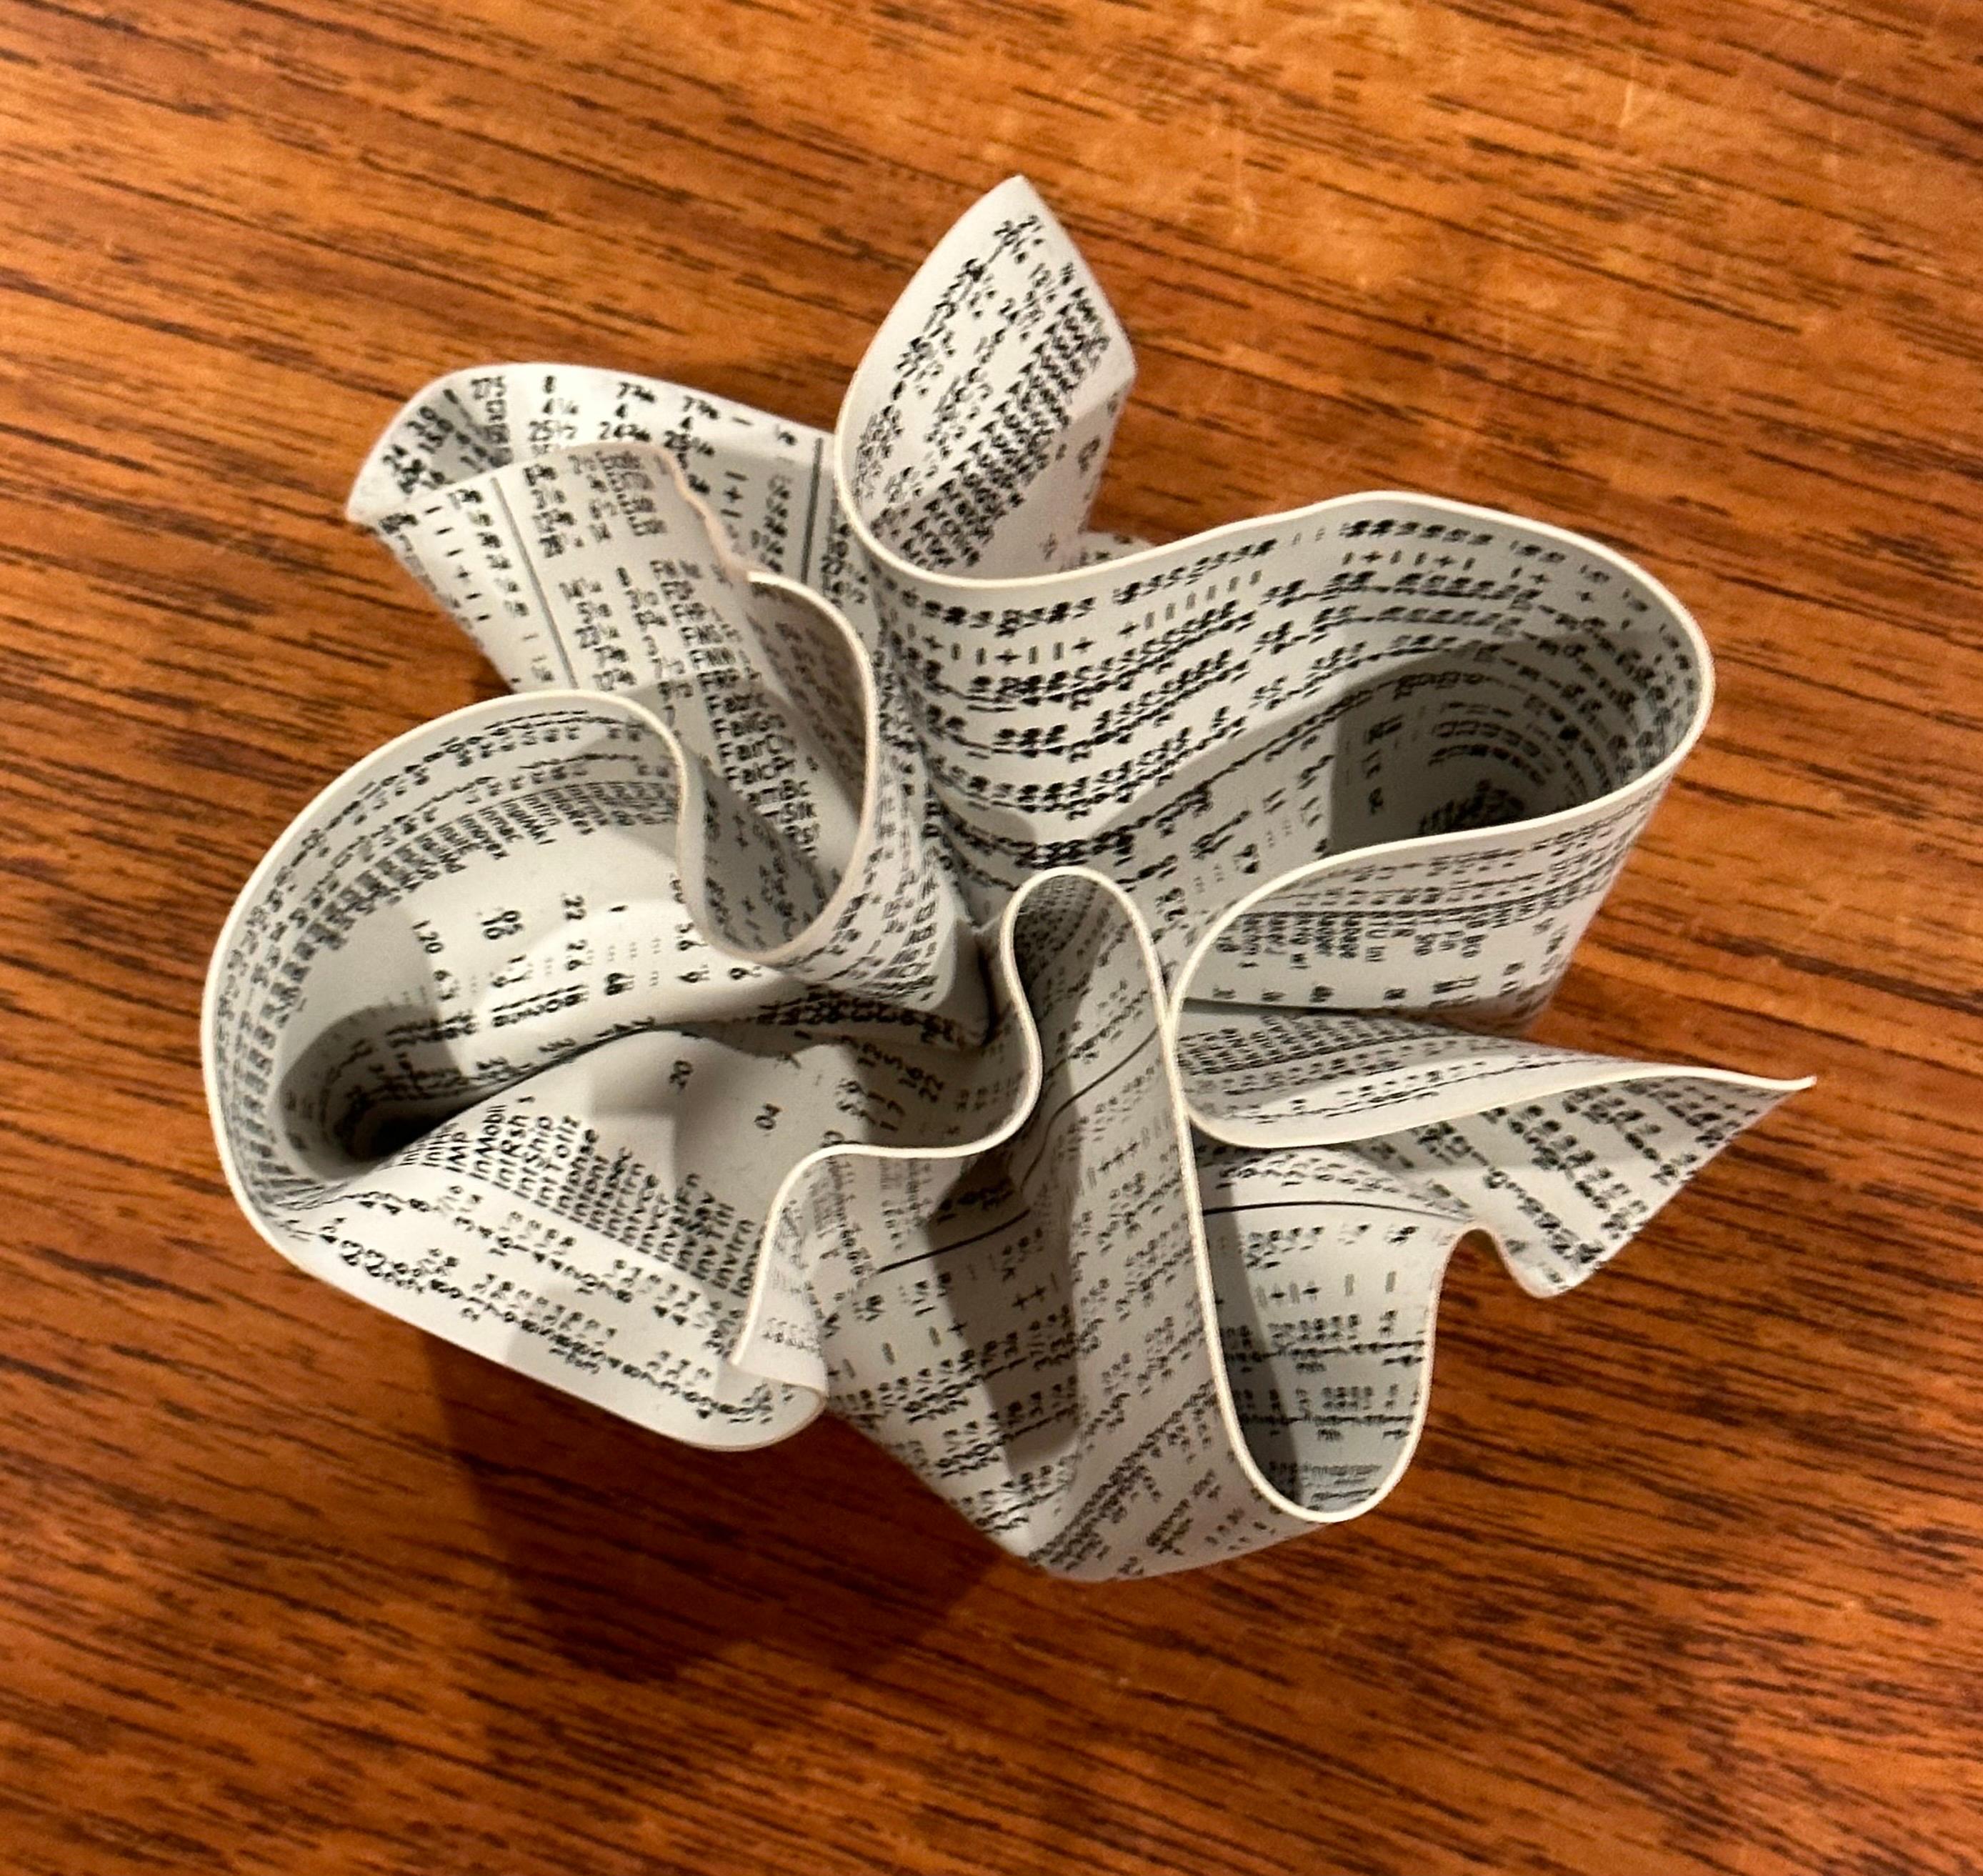 Crumpled WSJ / Newspaper Paperweight by Designer Tibor Kalman for M & Co. / MOMA In Good Condition For Sale In San Diego, CA